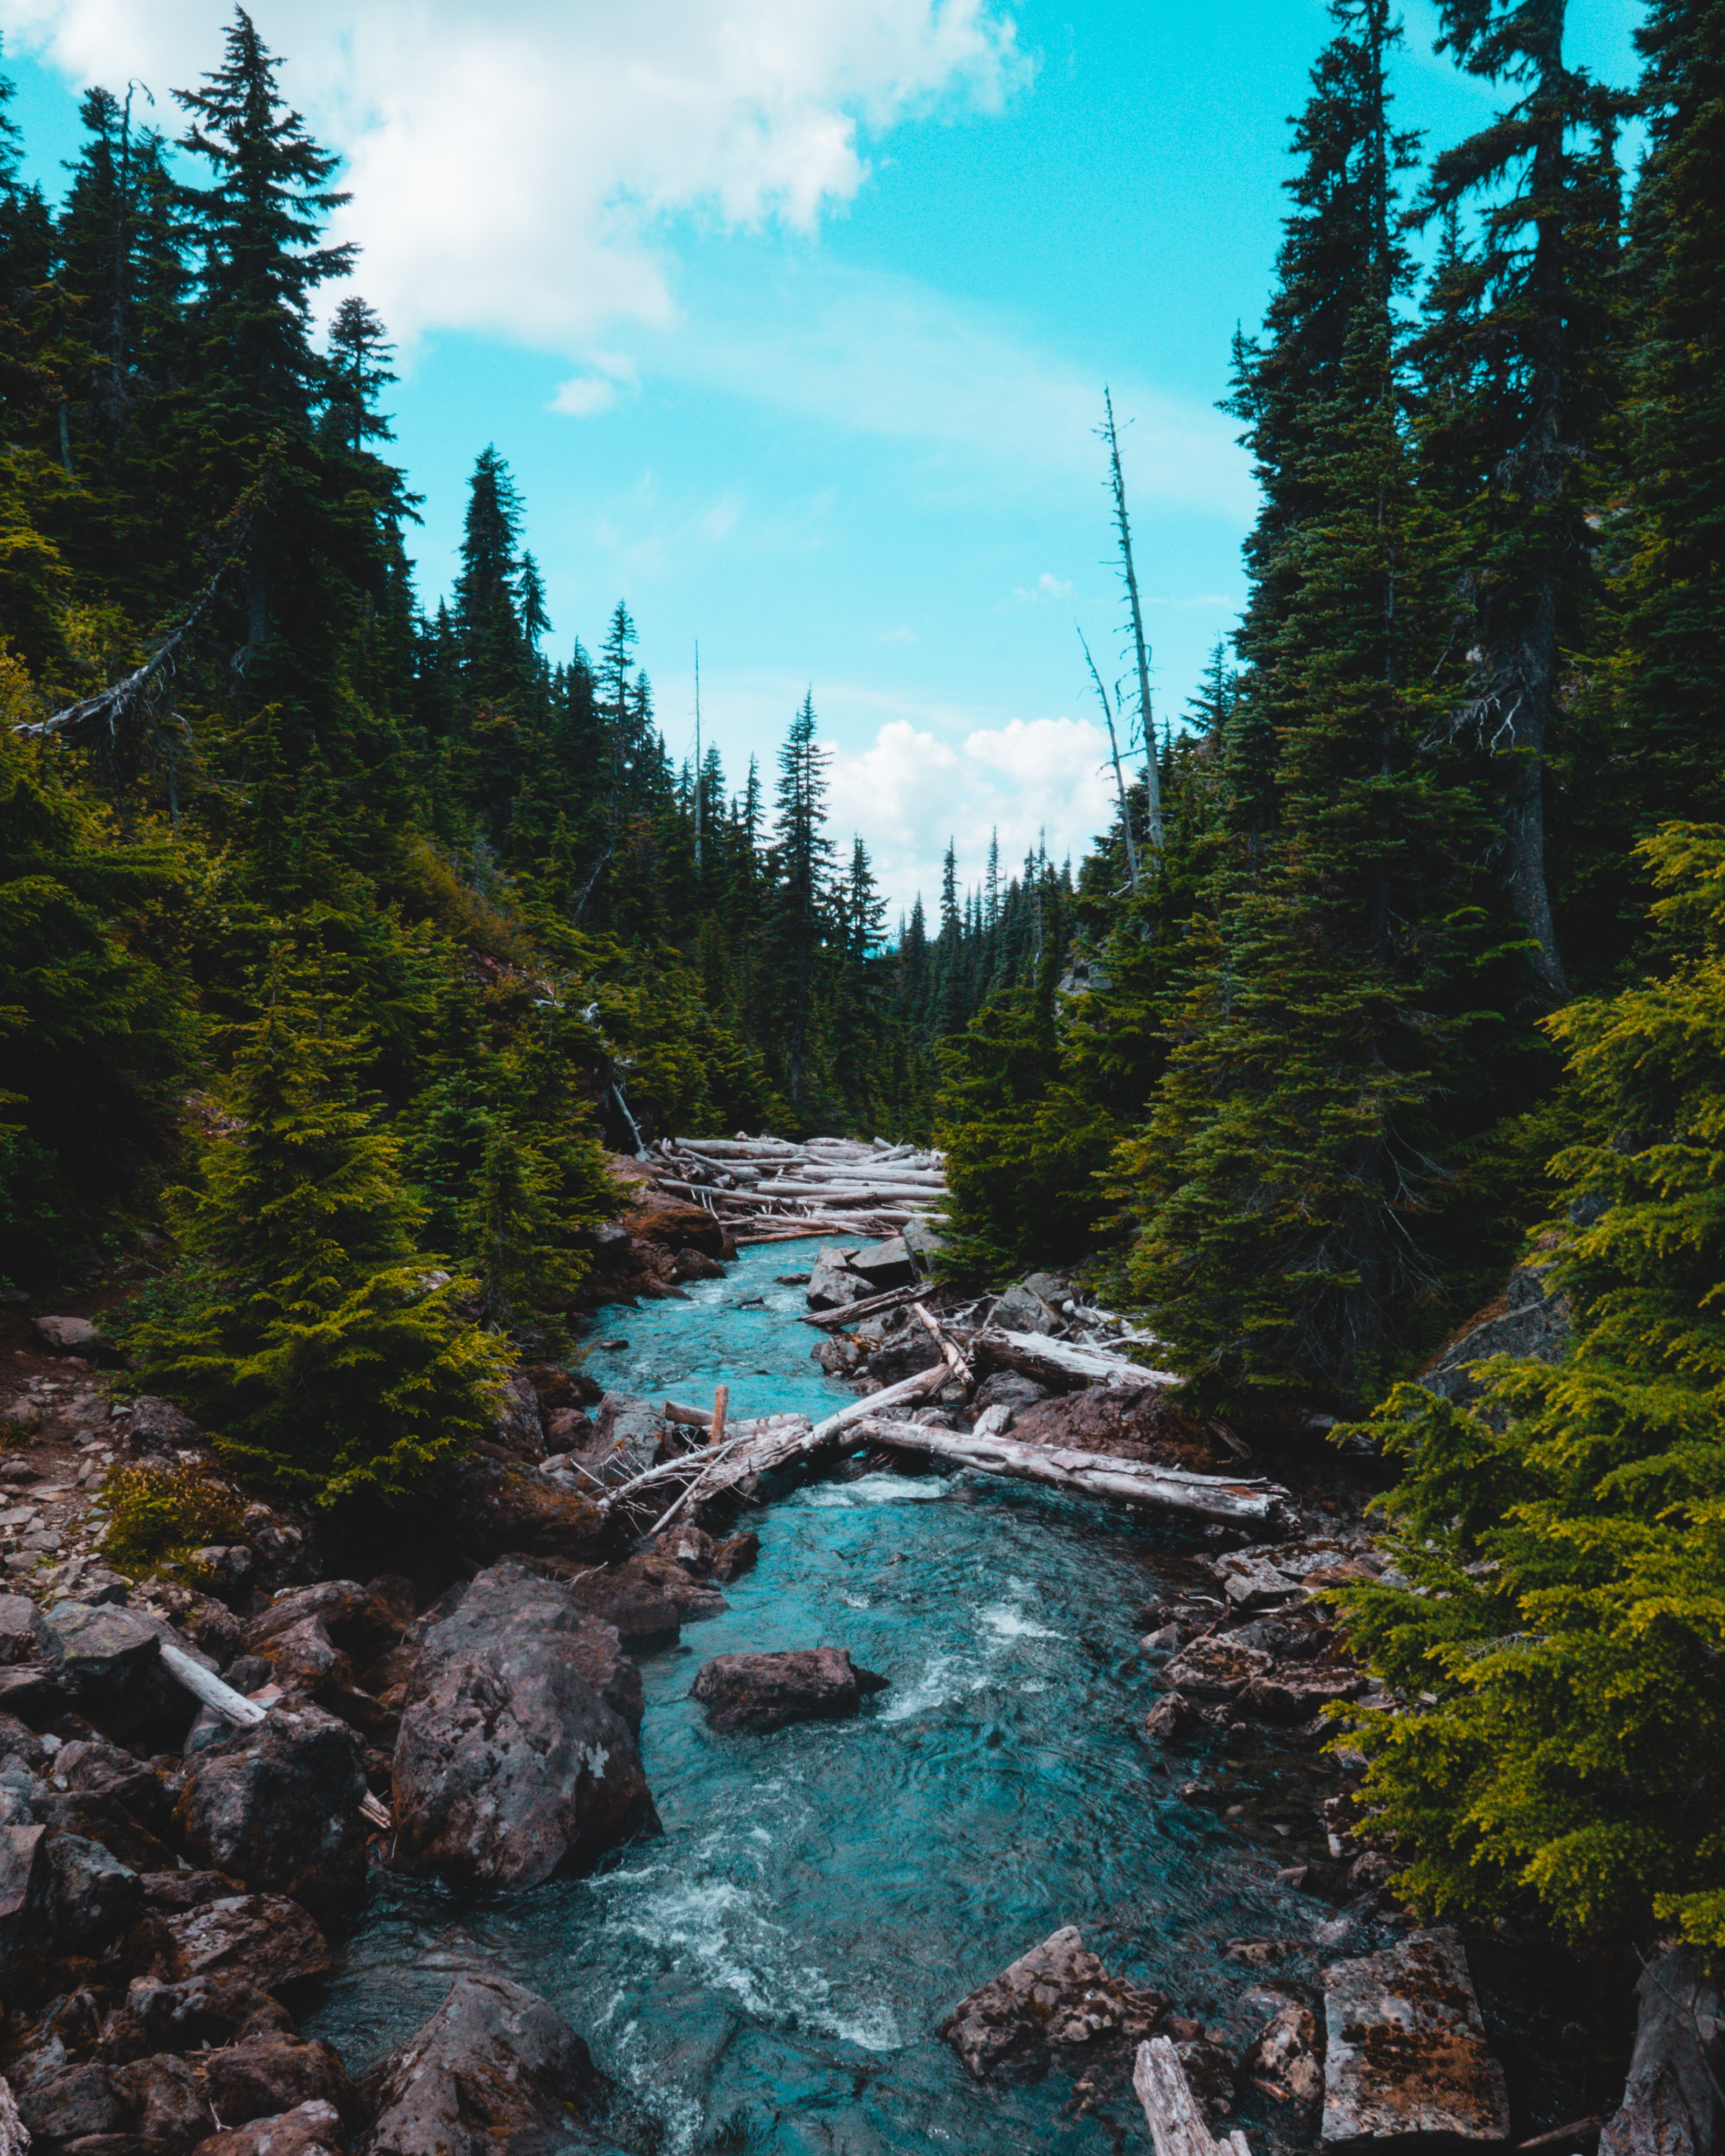 stones, nature, rivers, forest, flow, spruce, fir, stream